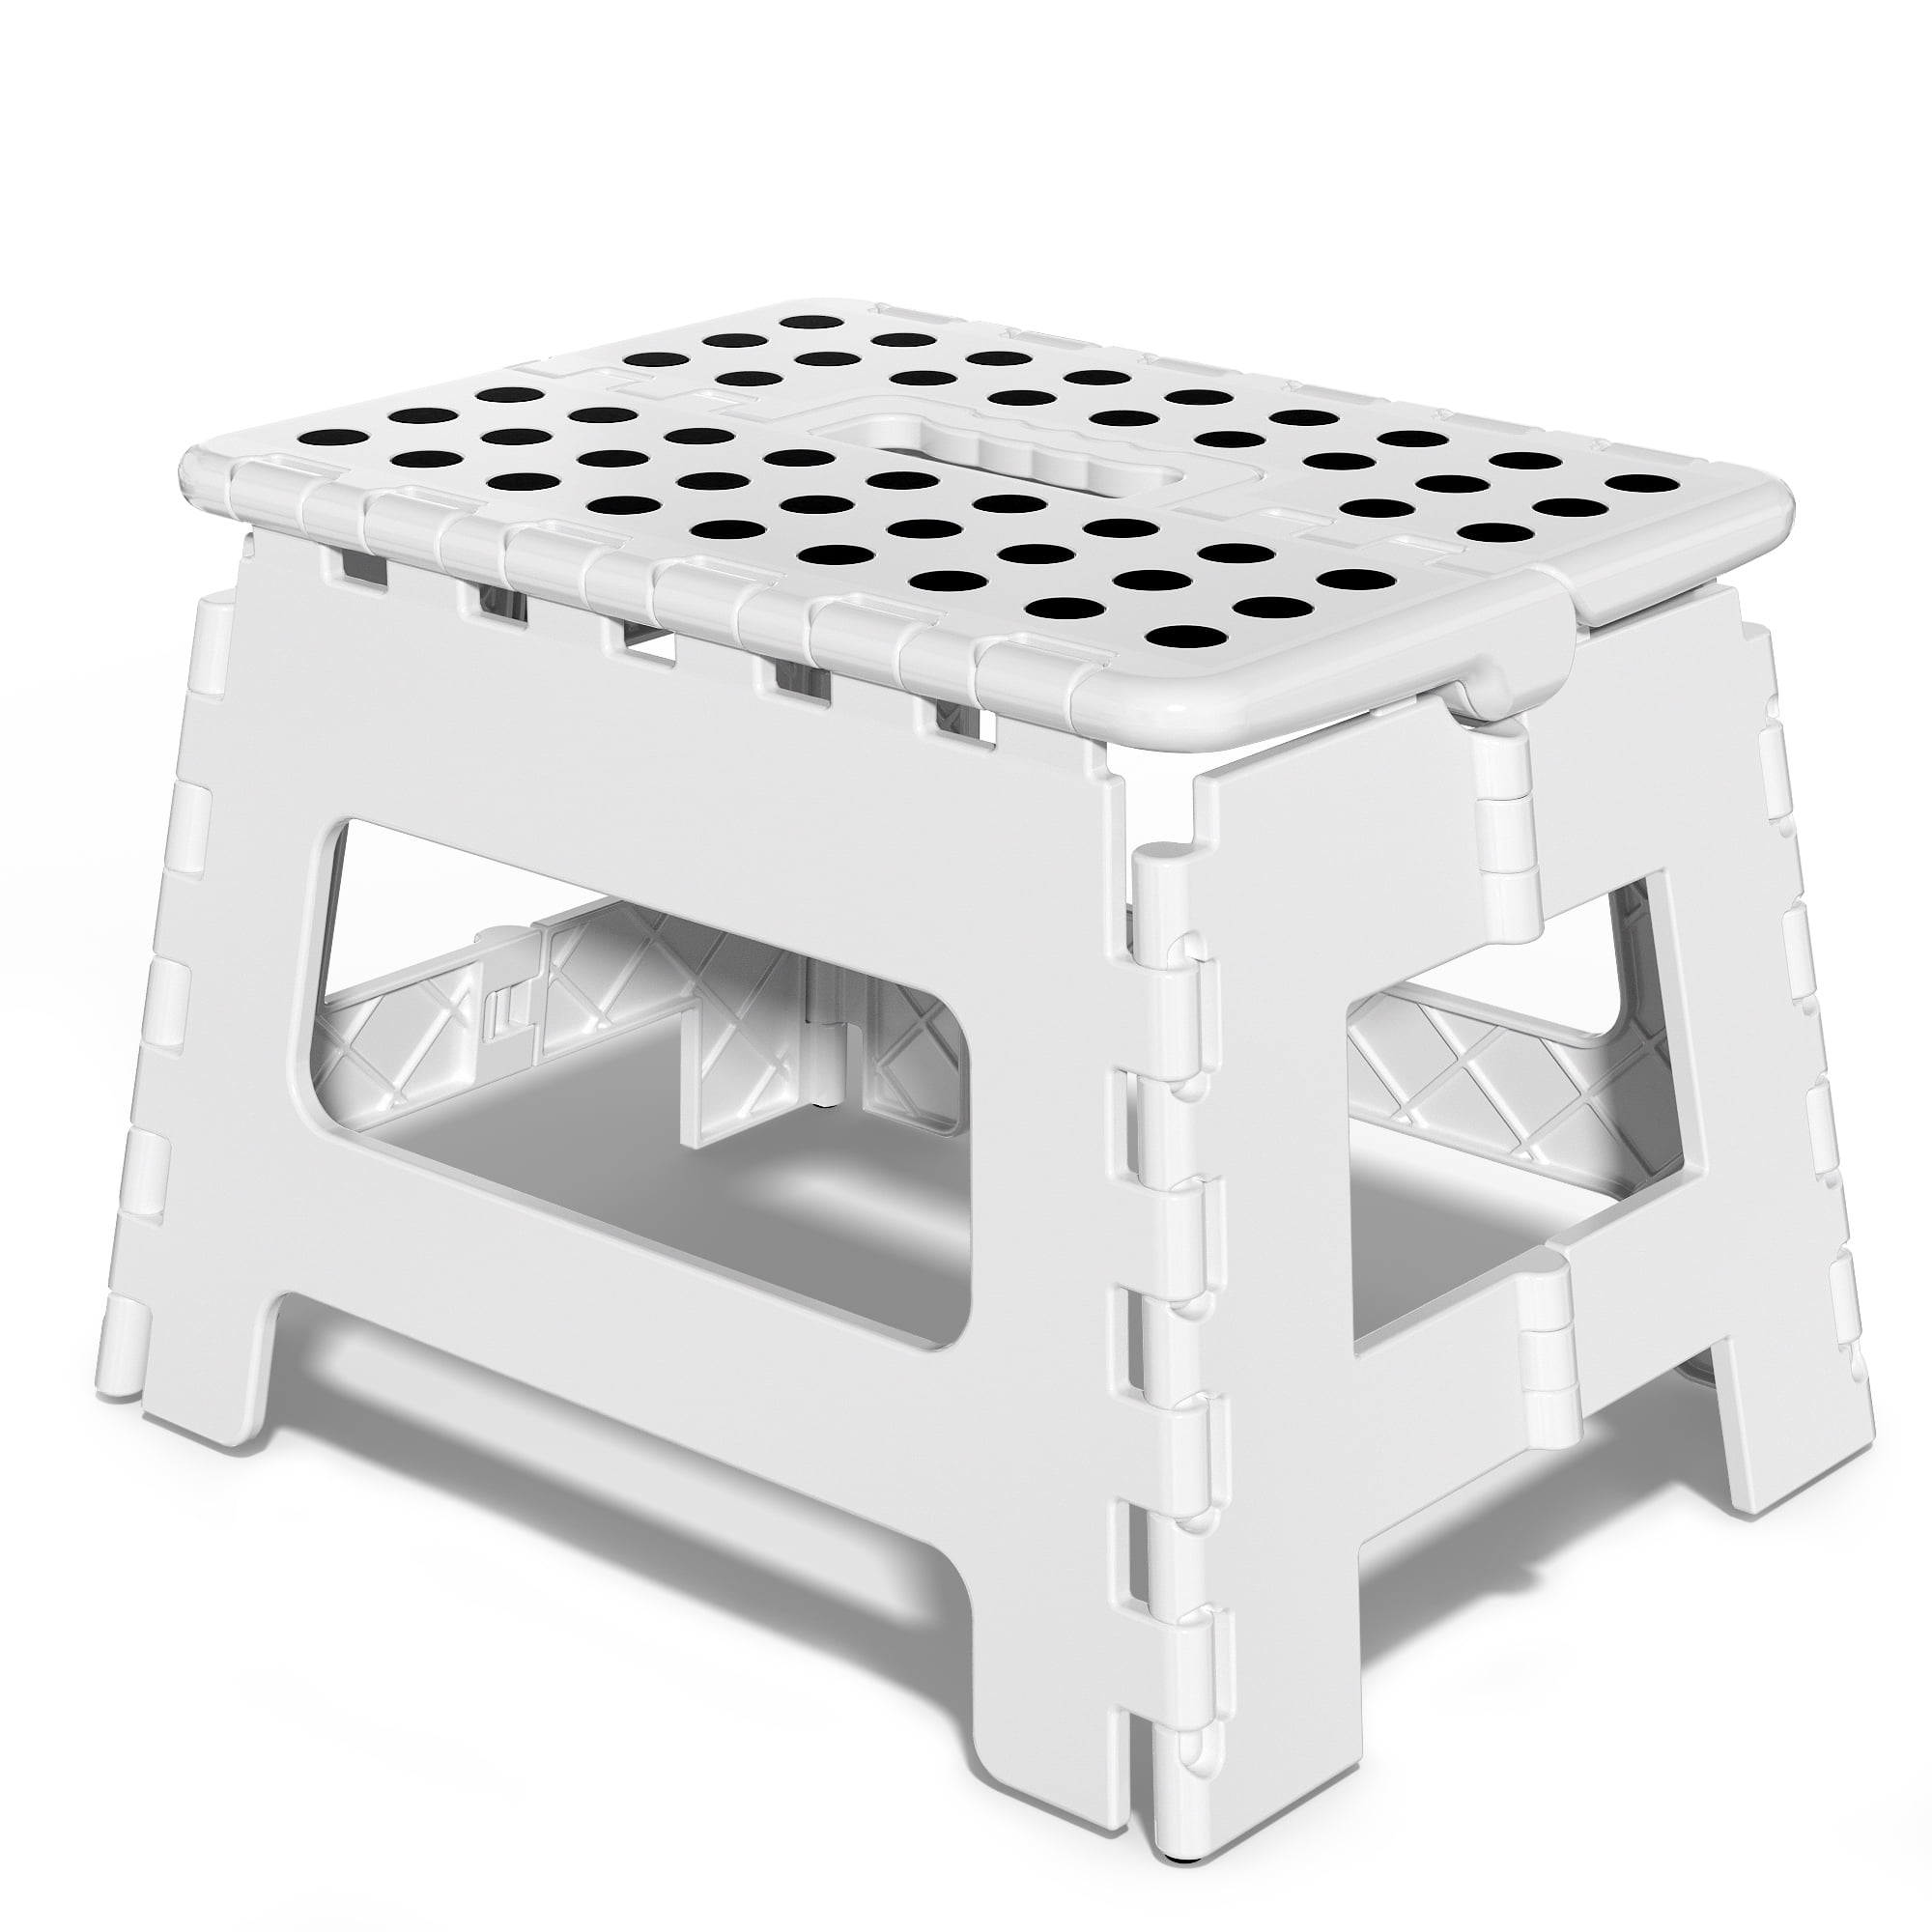 utopia home foldable step stool for kids - 11 inches wide and 9 inches tall  - white and black - holds up to 300 lbs - lightweight plastic design 